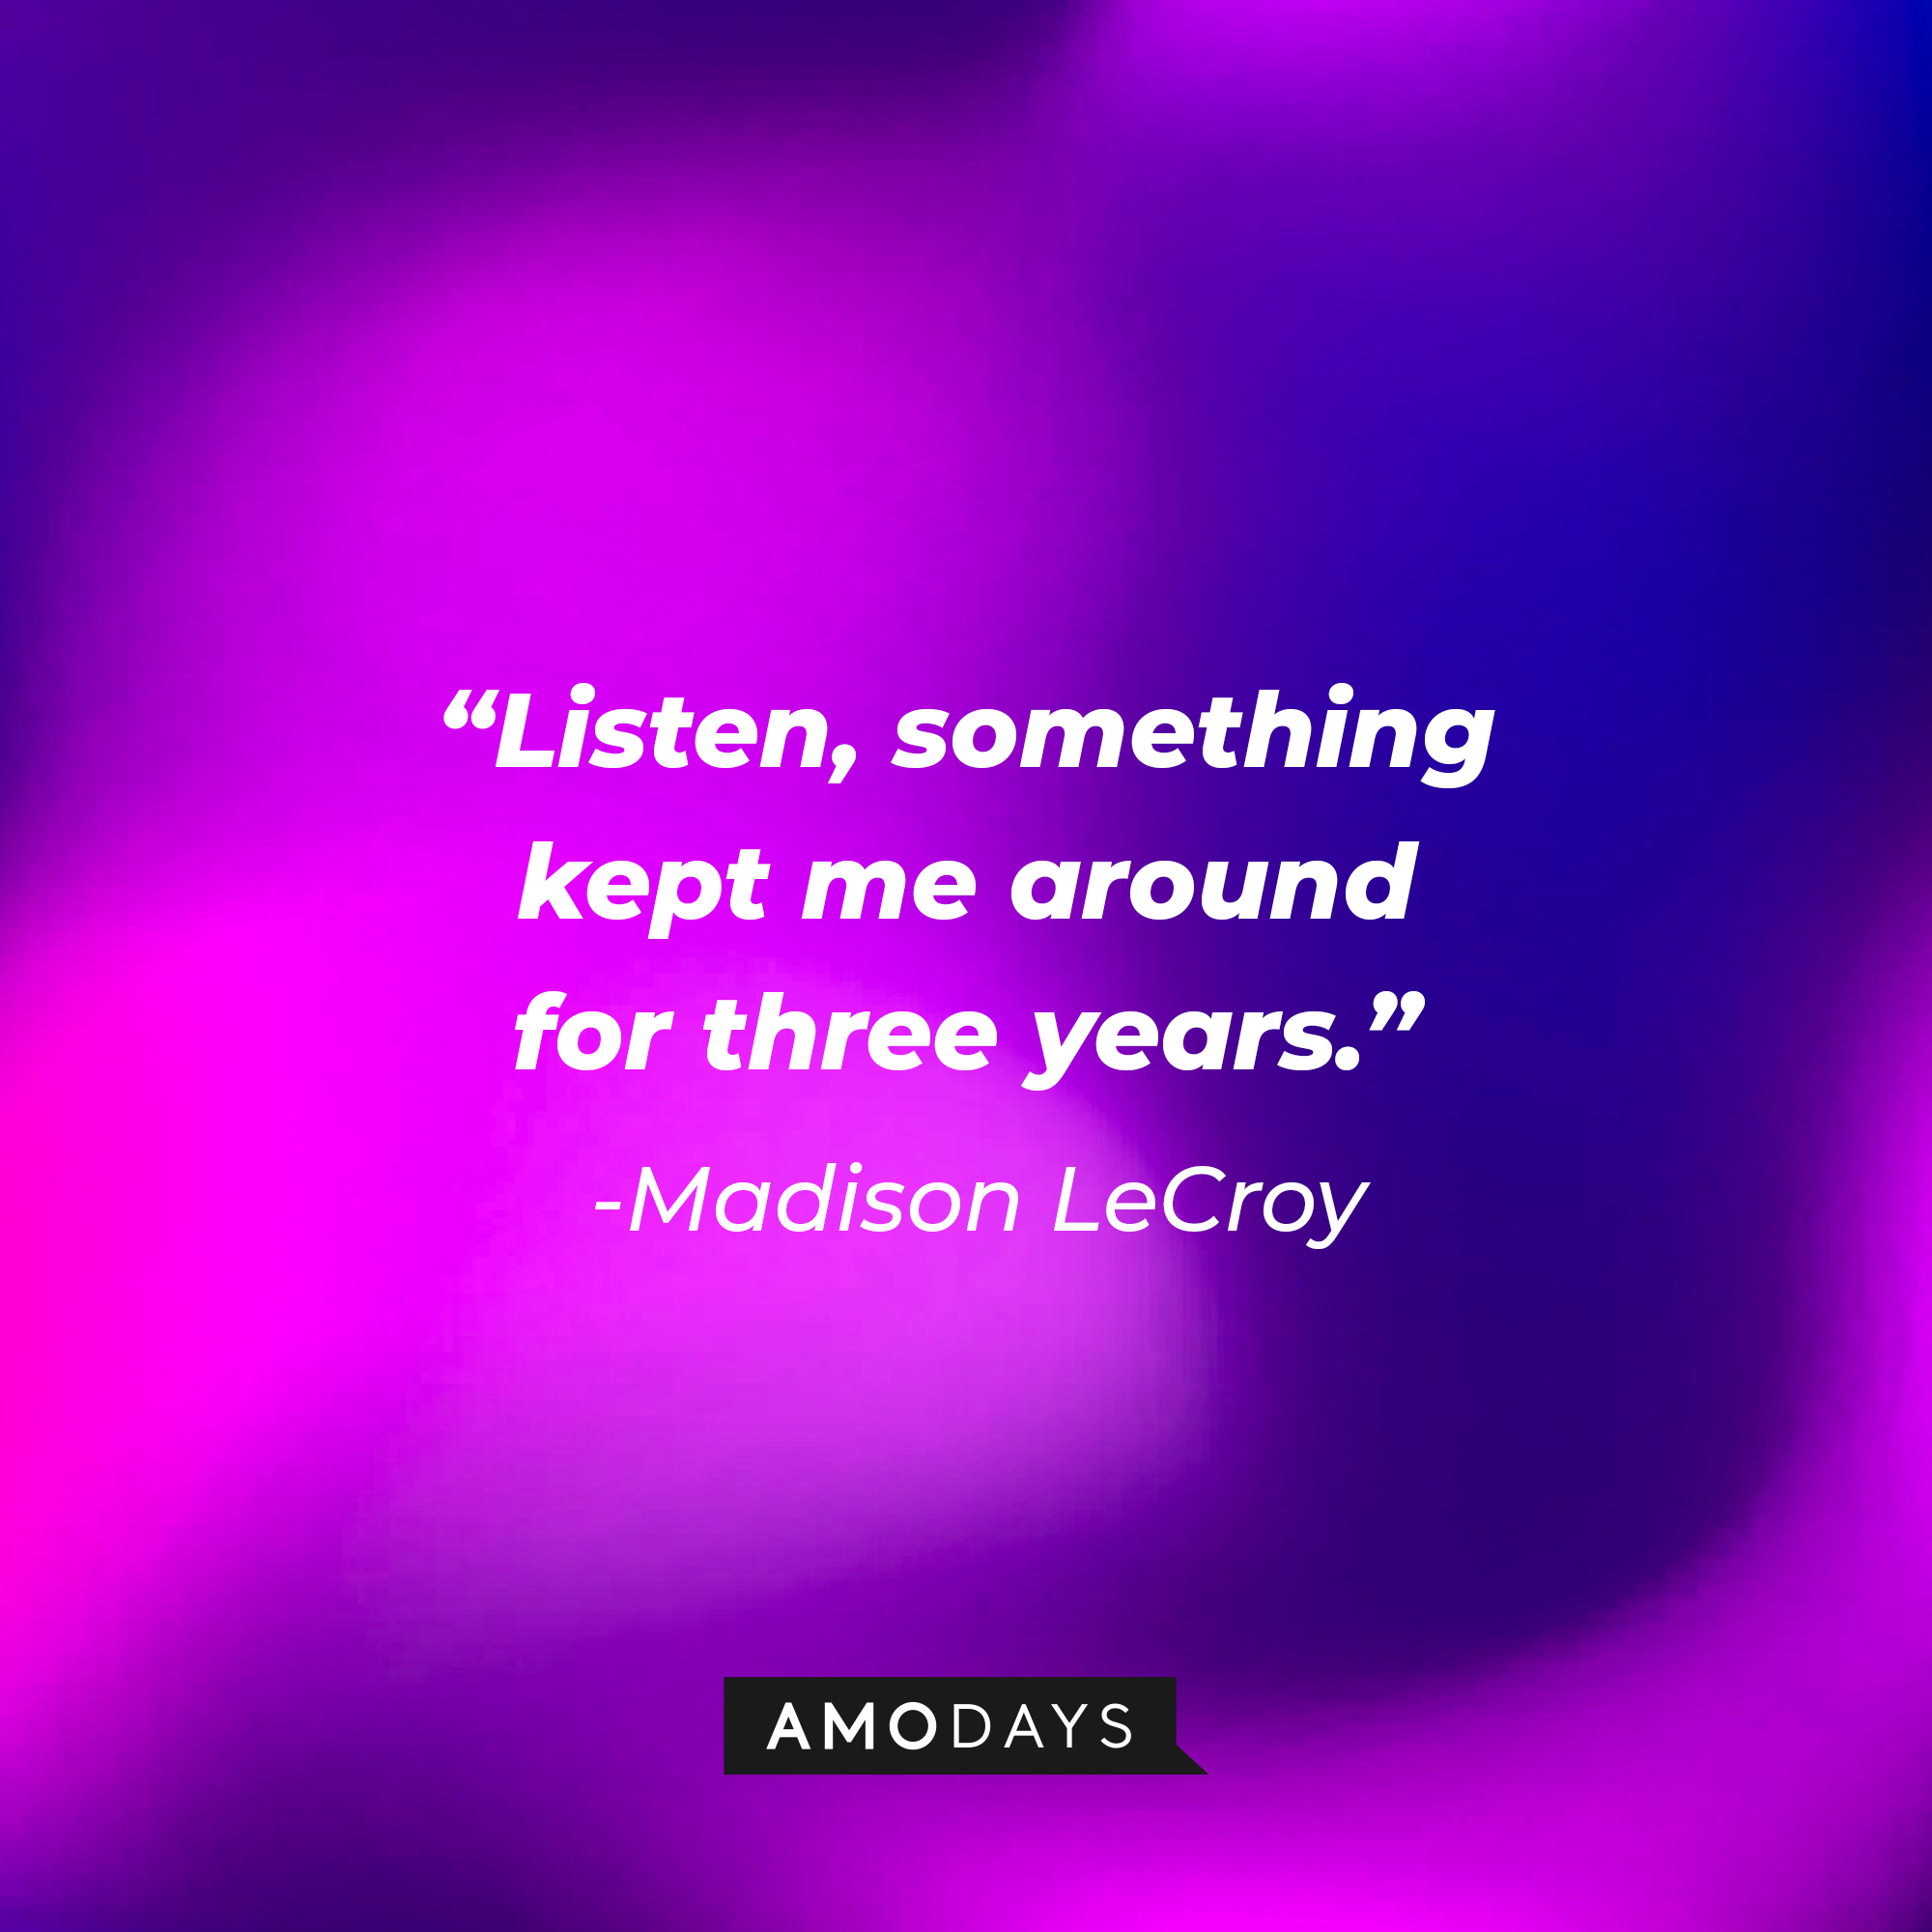 Madison LeCray's quote: "Listen, something kept me around for three years." | Source: AmoDays